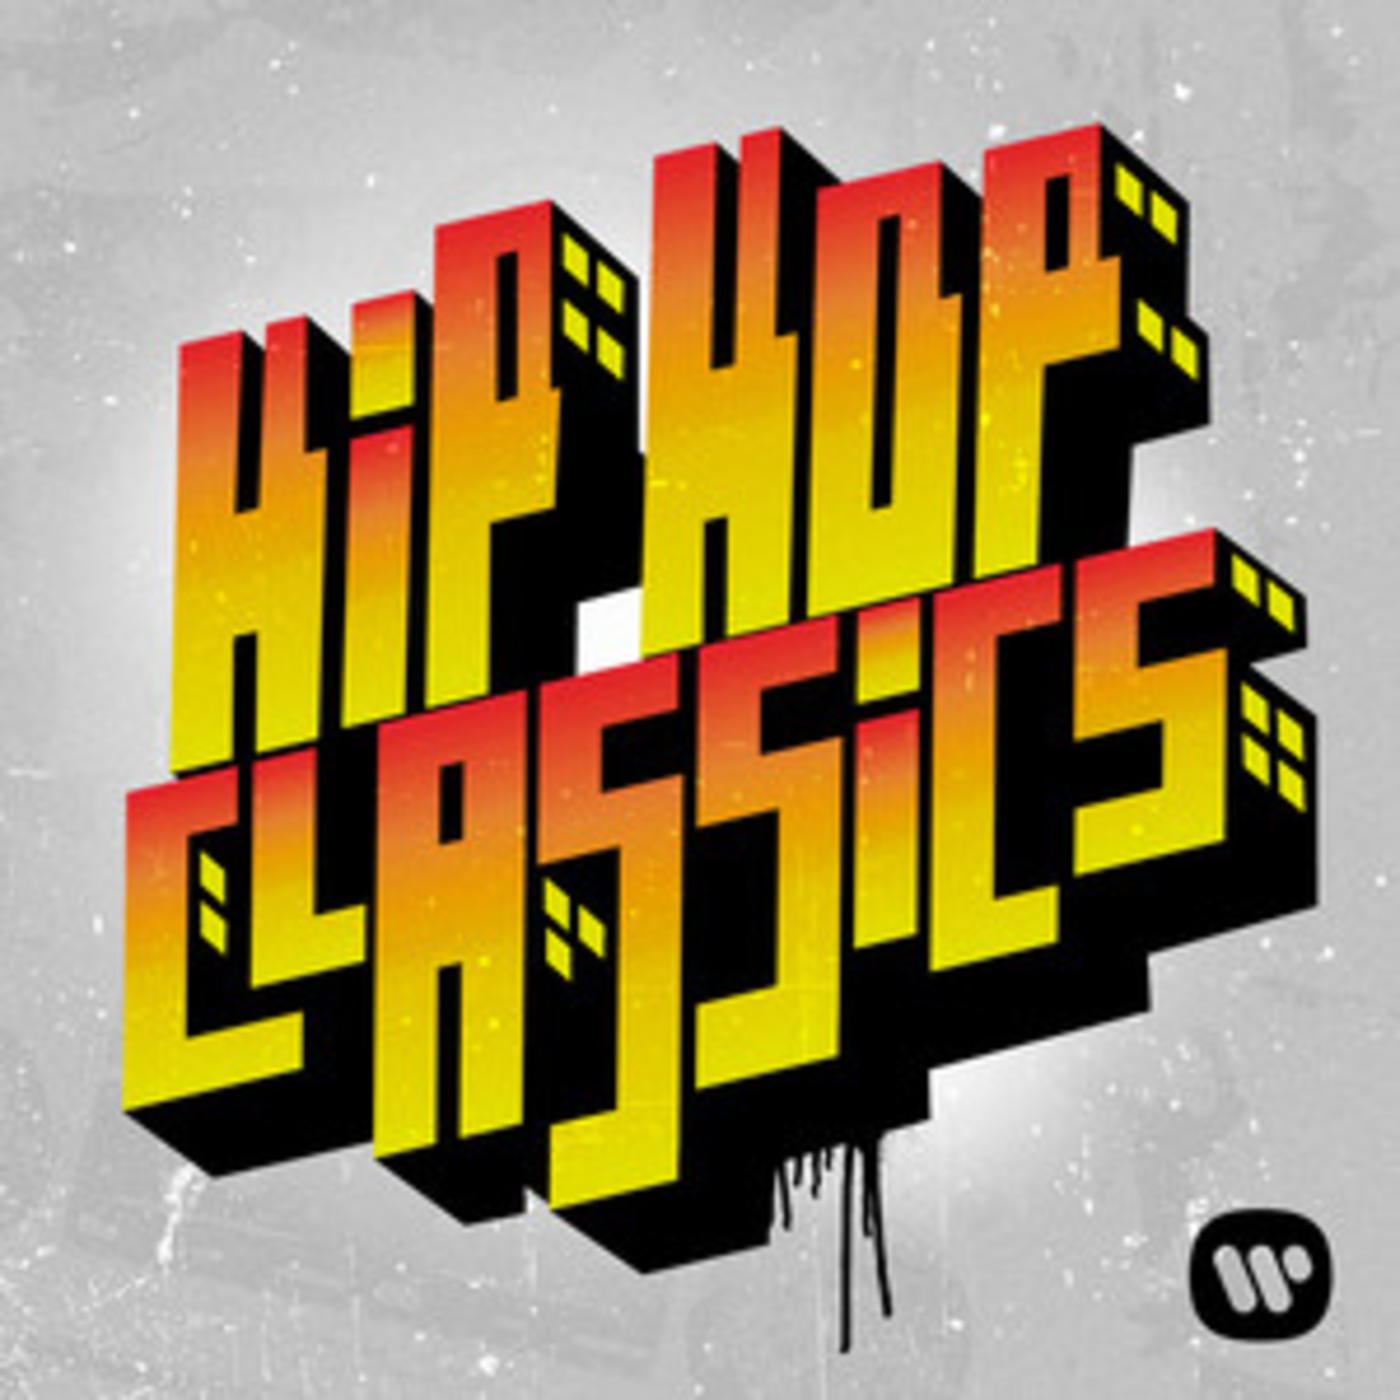 HIPHOP CLASSICS ( mit De La Soul, Naughty By Nature, A Tribe Called Quest, House Of Pain, Deichkind, Seeed, Tone-Loc, Public Enemy, Peter Fox, Gang Starr, Sugarhill Gang, The Streets )